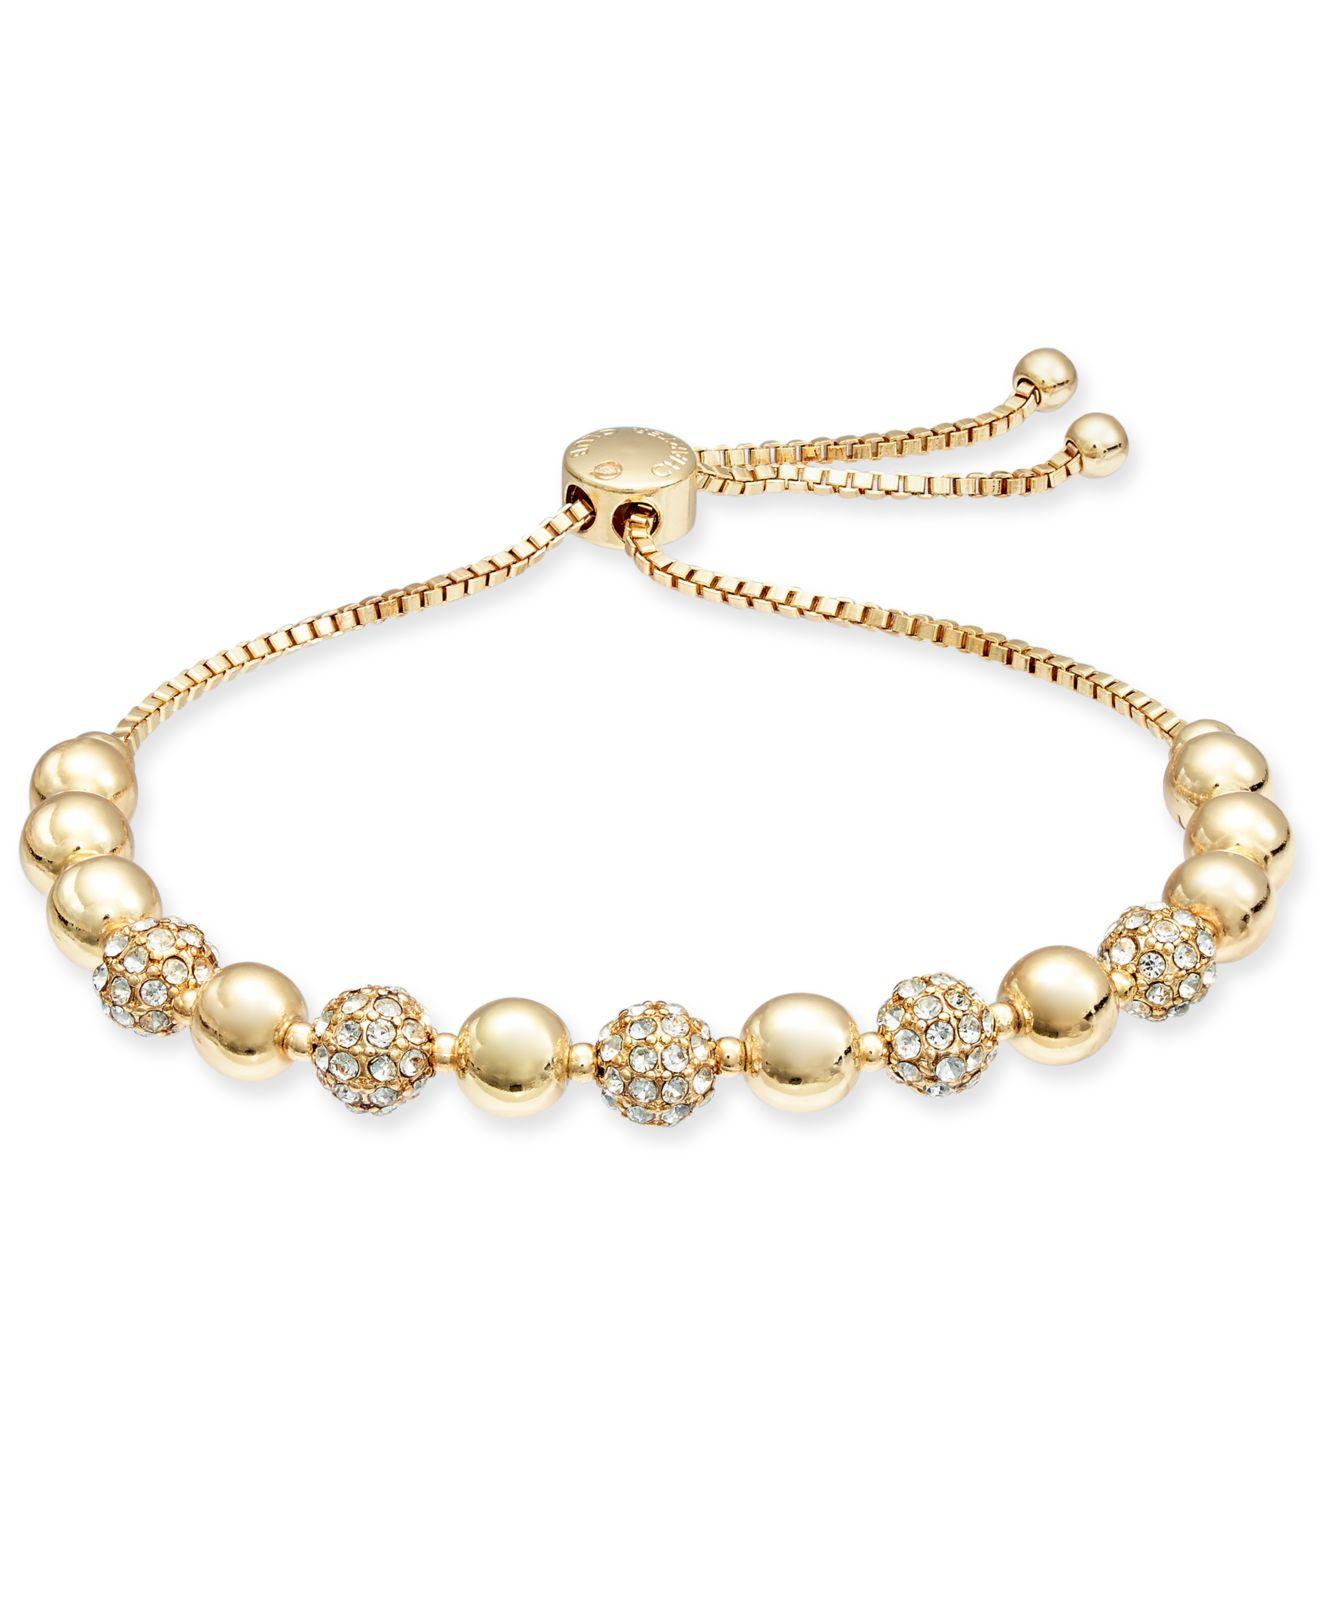 Details about   Charter Club Silver-Tone Crystal and Stone Stretch Bracelet Choose Color 